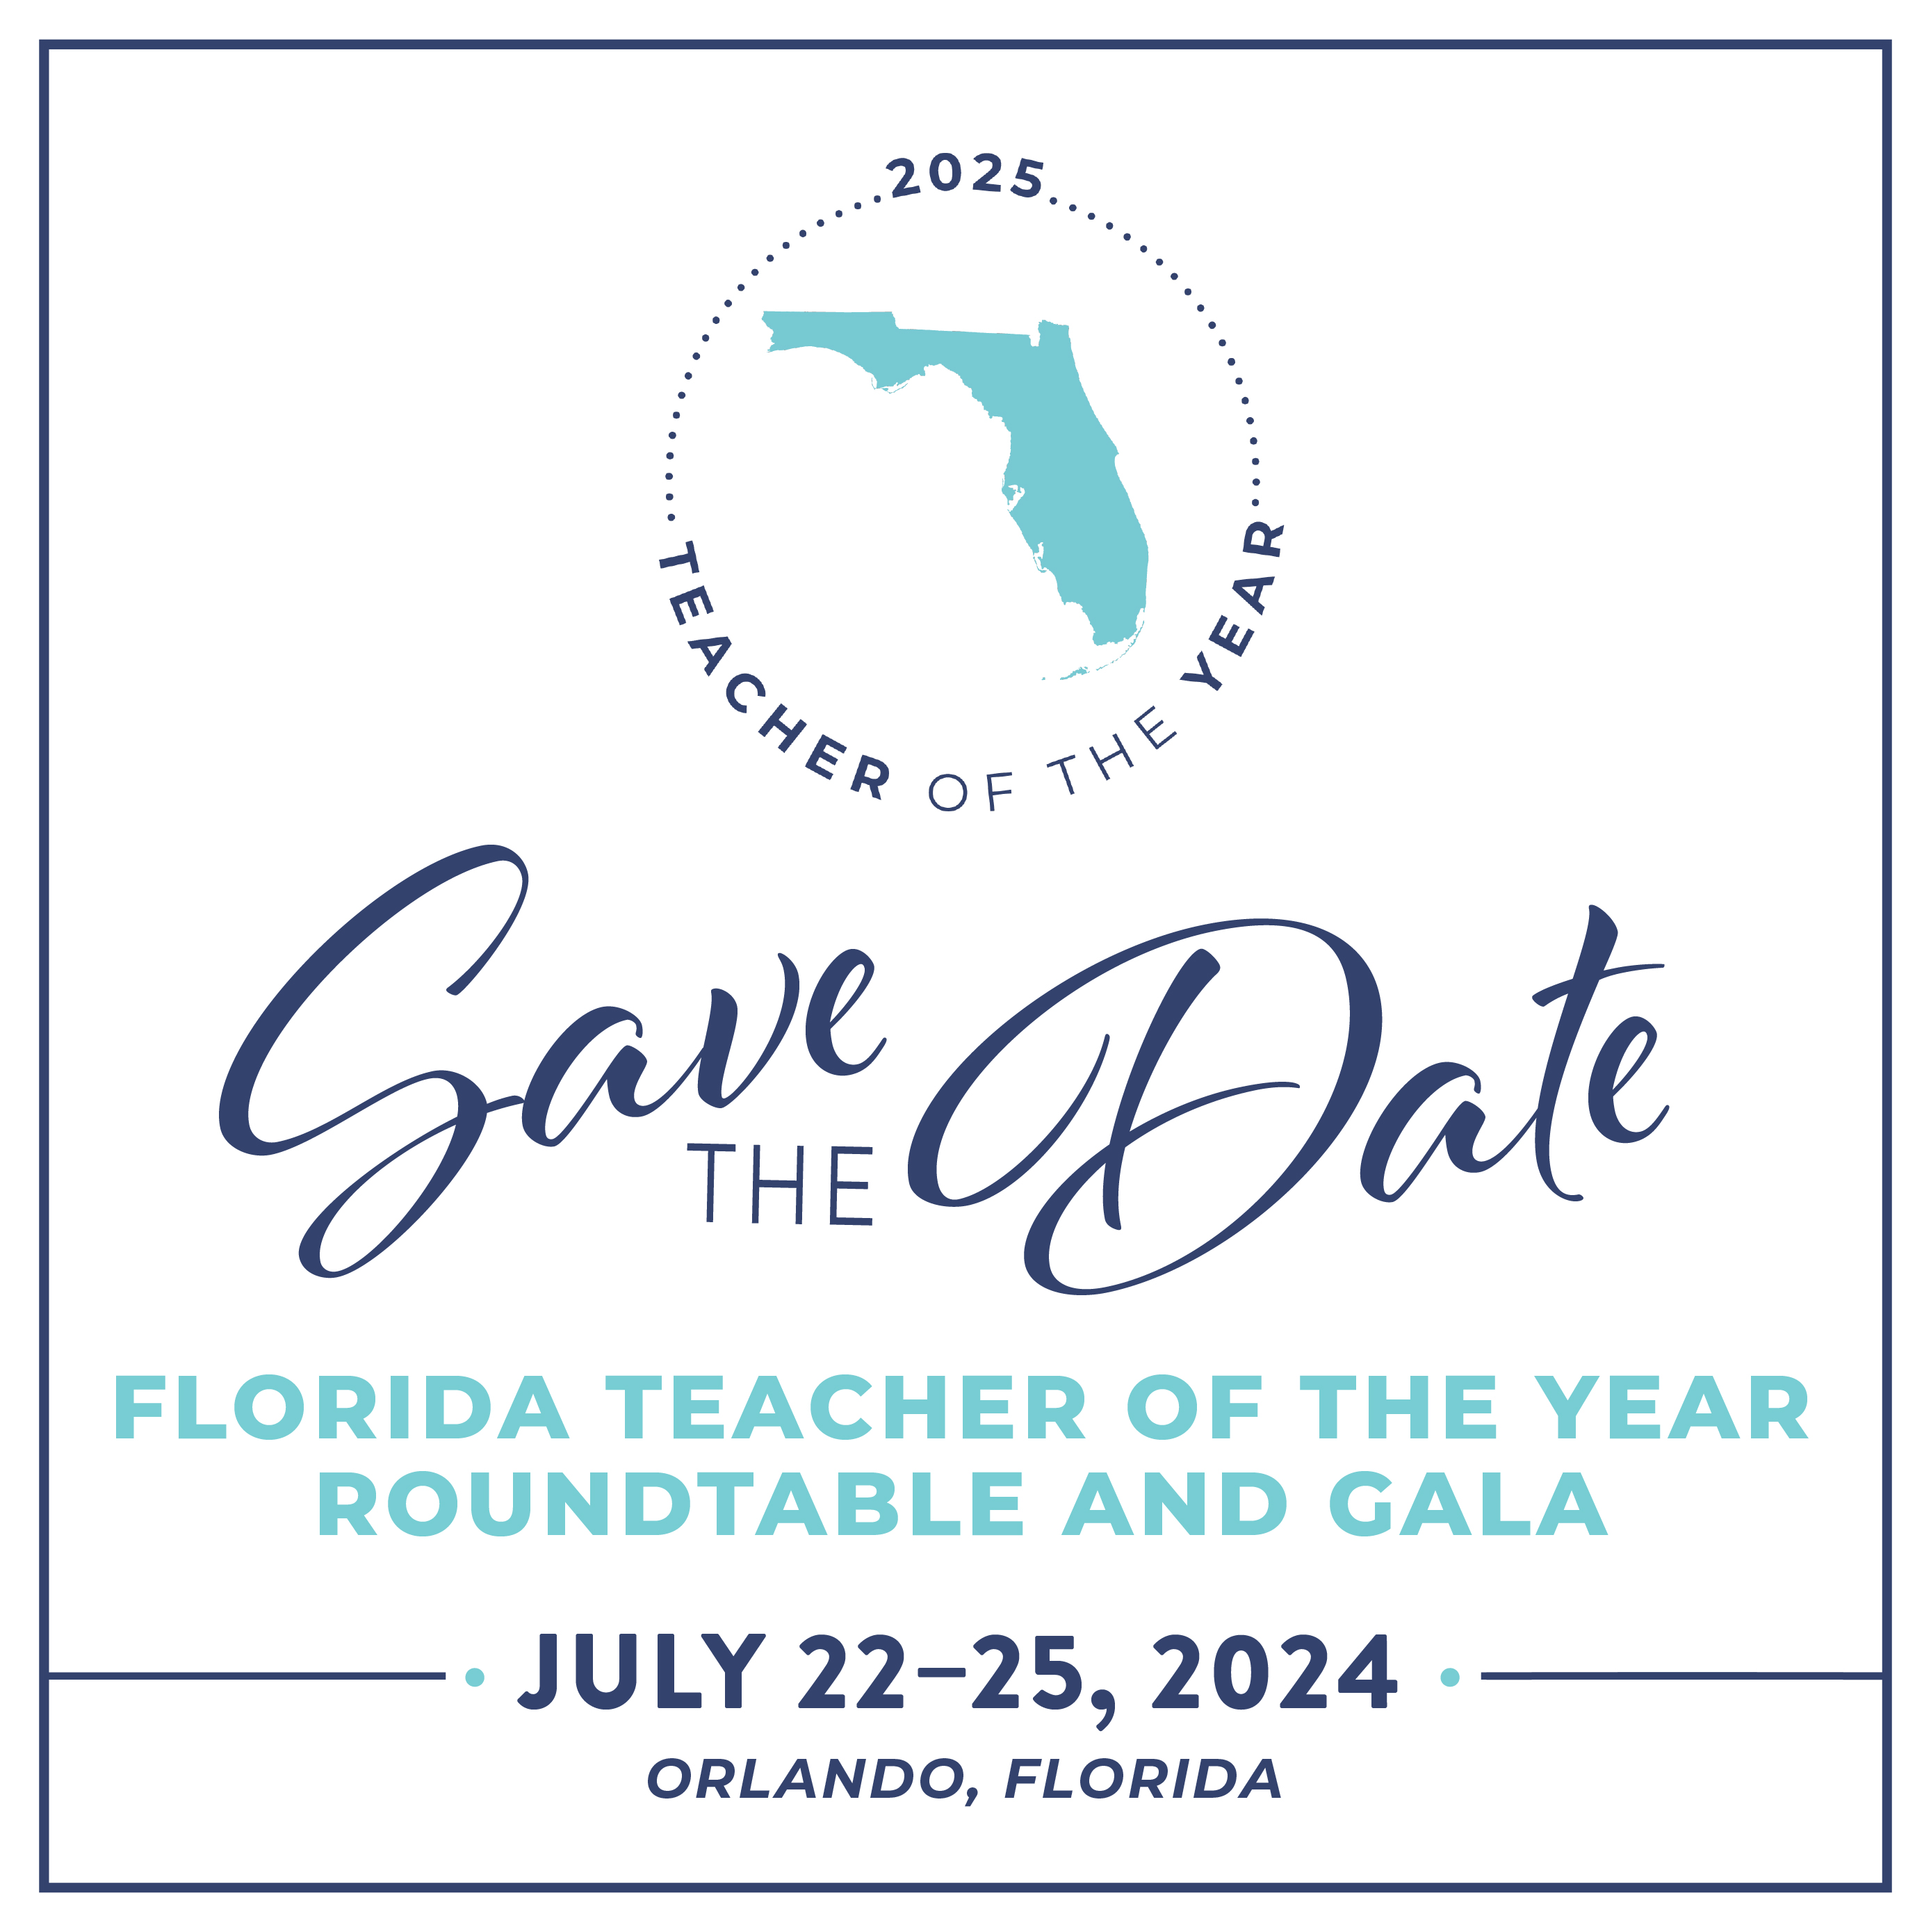 2025 Teacher of the Year Save the Date - Florida Teacher of the Year Roundtable and Gala - July 22-25, 2024 - Orlando, FL